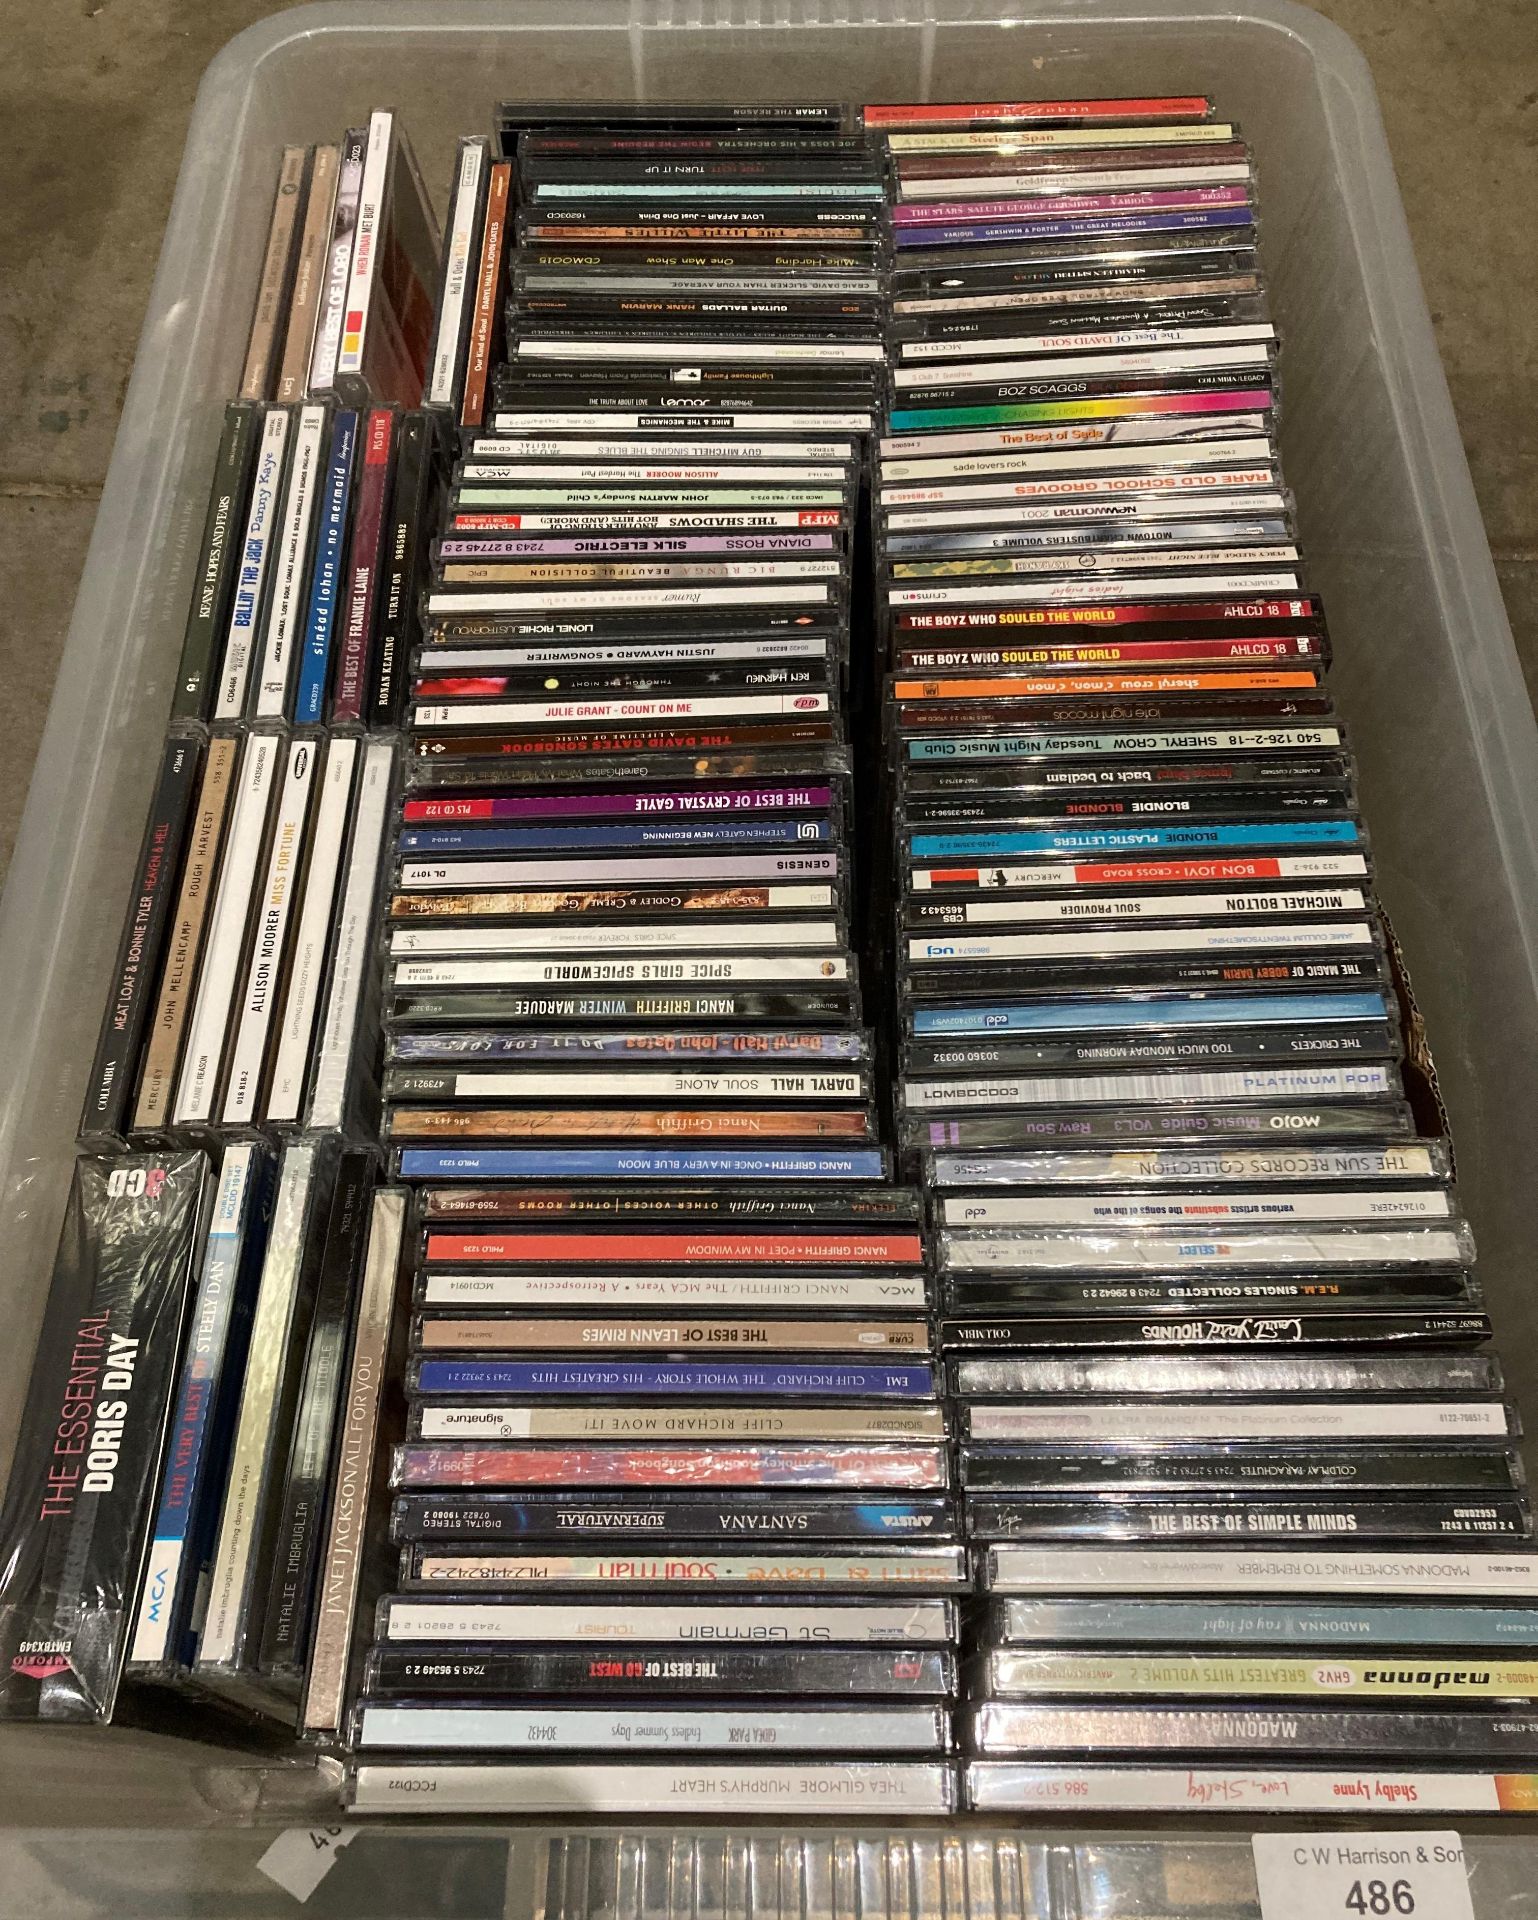 Contents to crate - approximately 120 assorted music CDs including artists - Doris Day,